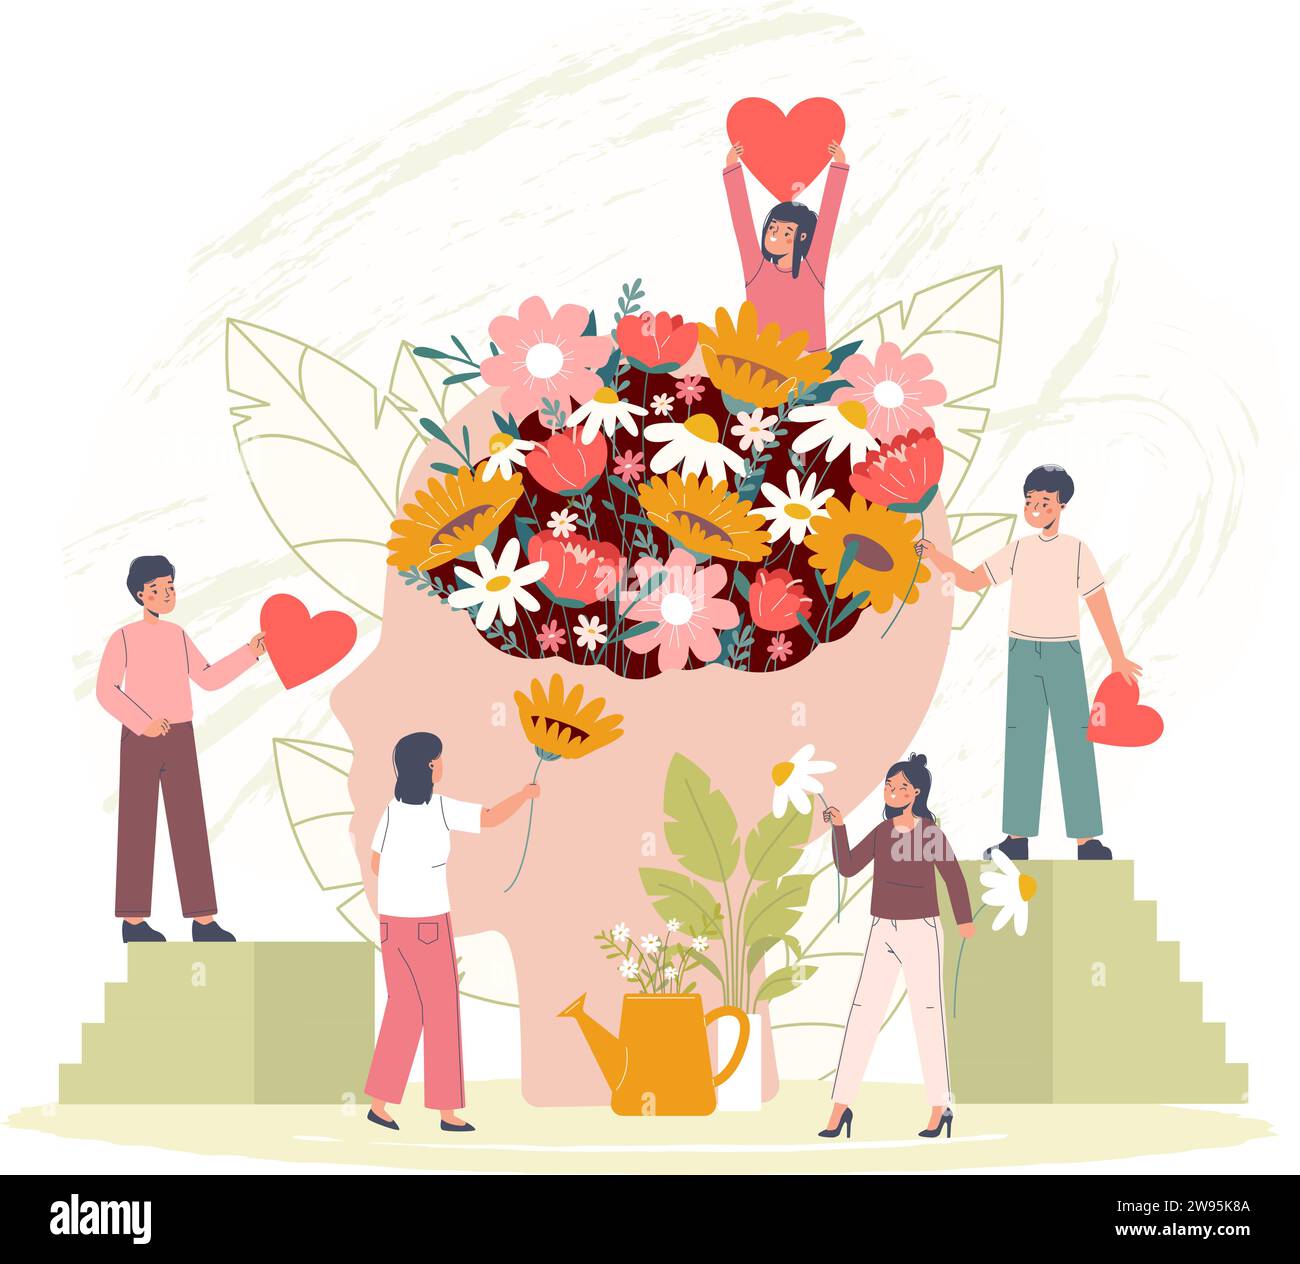 Brain health care. Young people, teenagers caring about mind. Recovery mental health with love, support and flowers. Positive thinking snugly vector Stock Vector